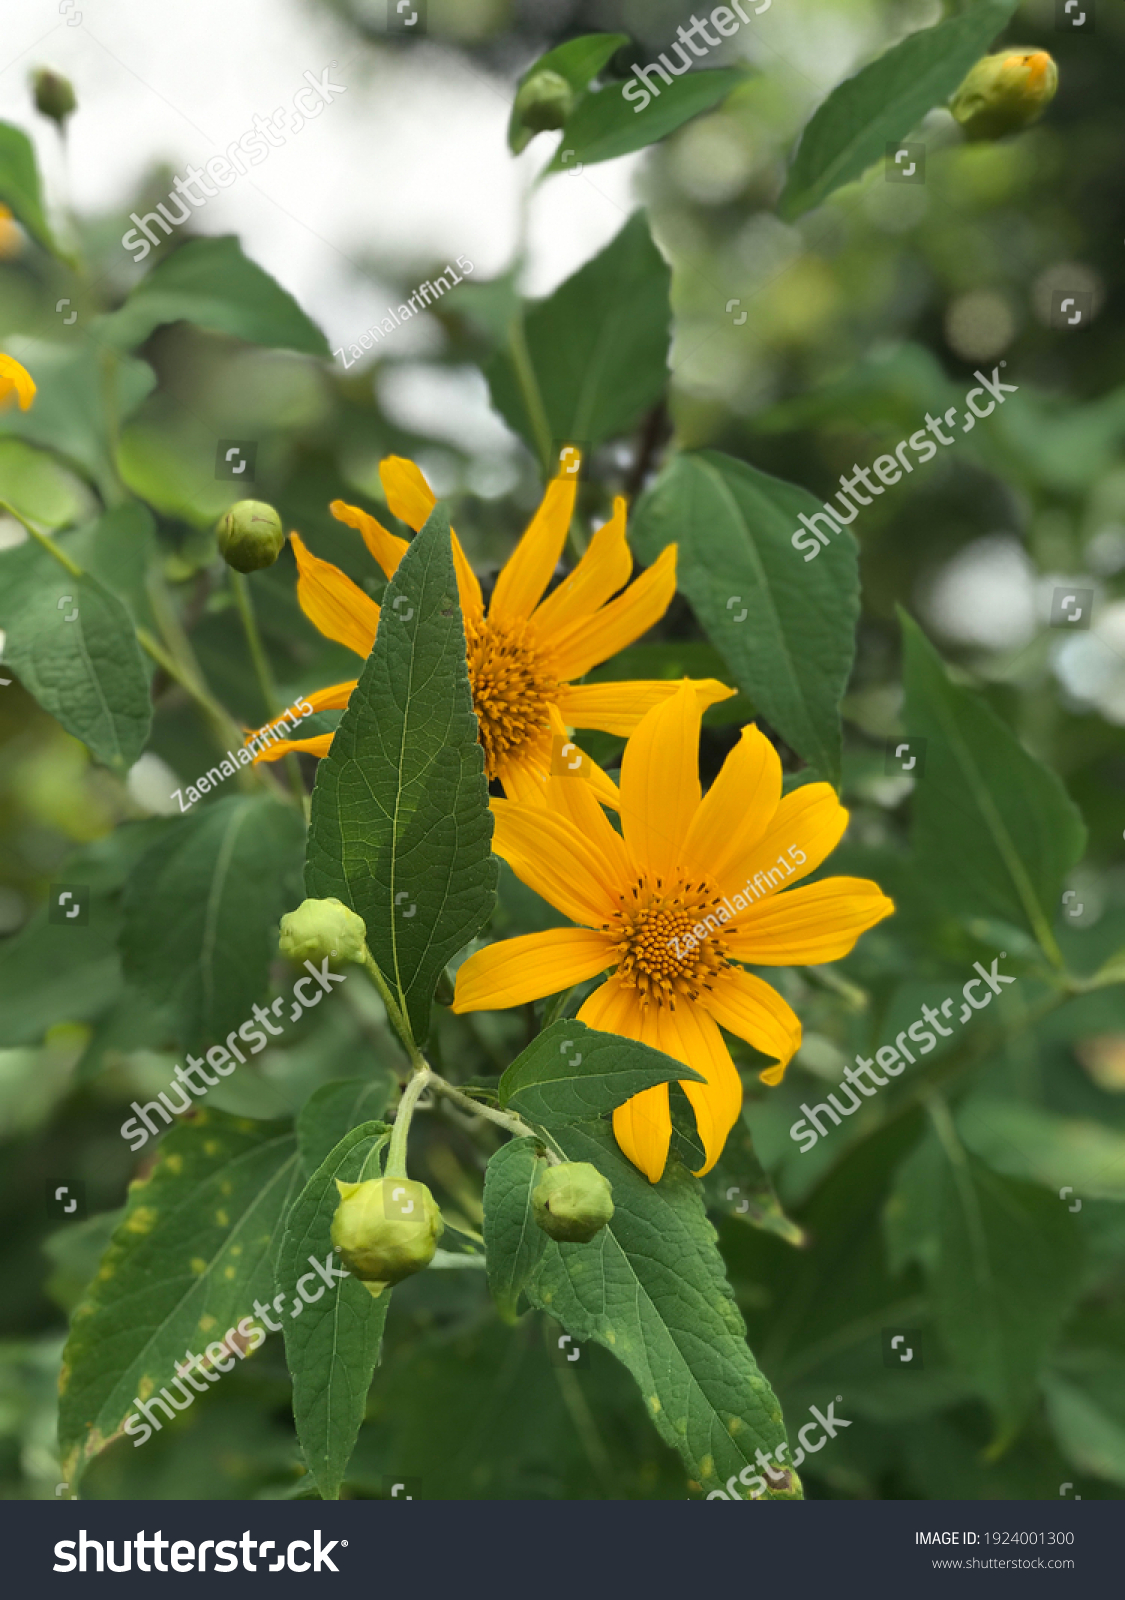 photograpy of sunflower in the summer look very beautiful plant. good for insipiration to maintain it at home, etc #1924001300